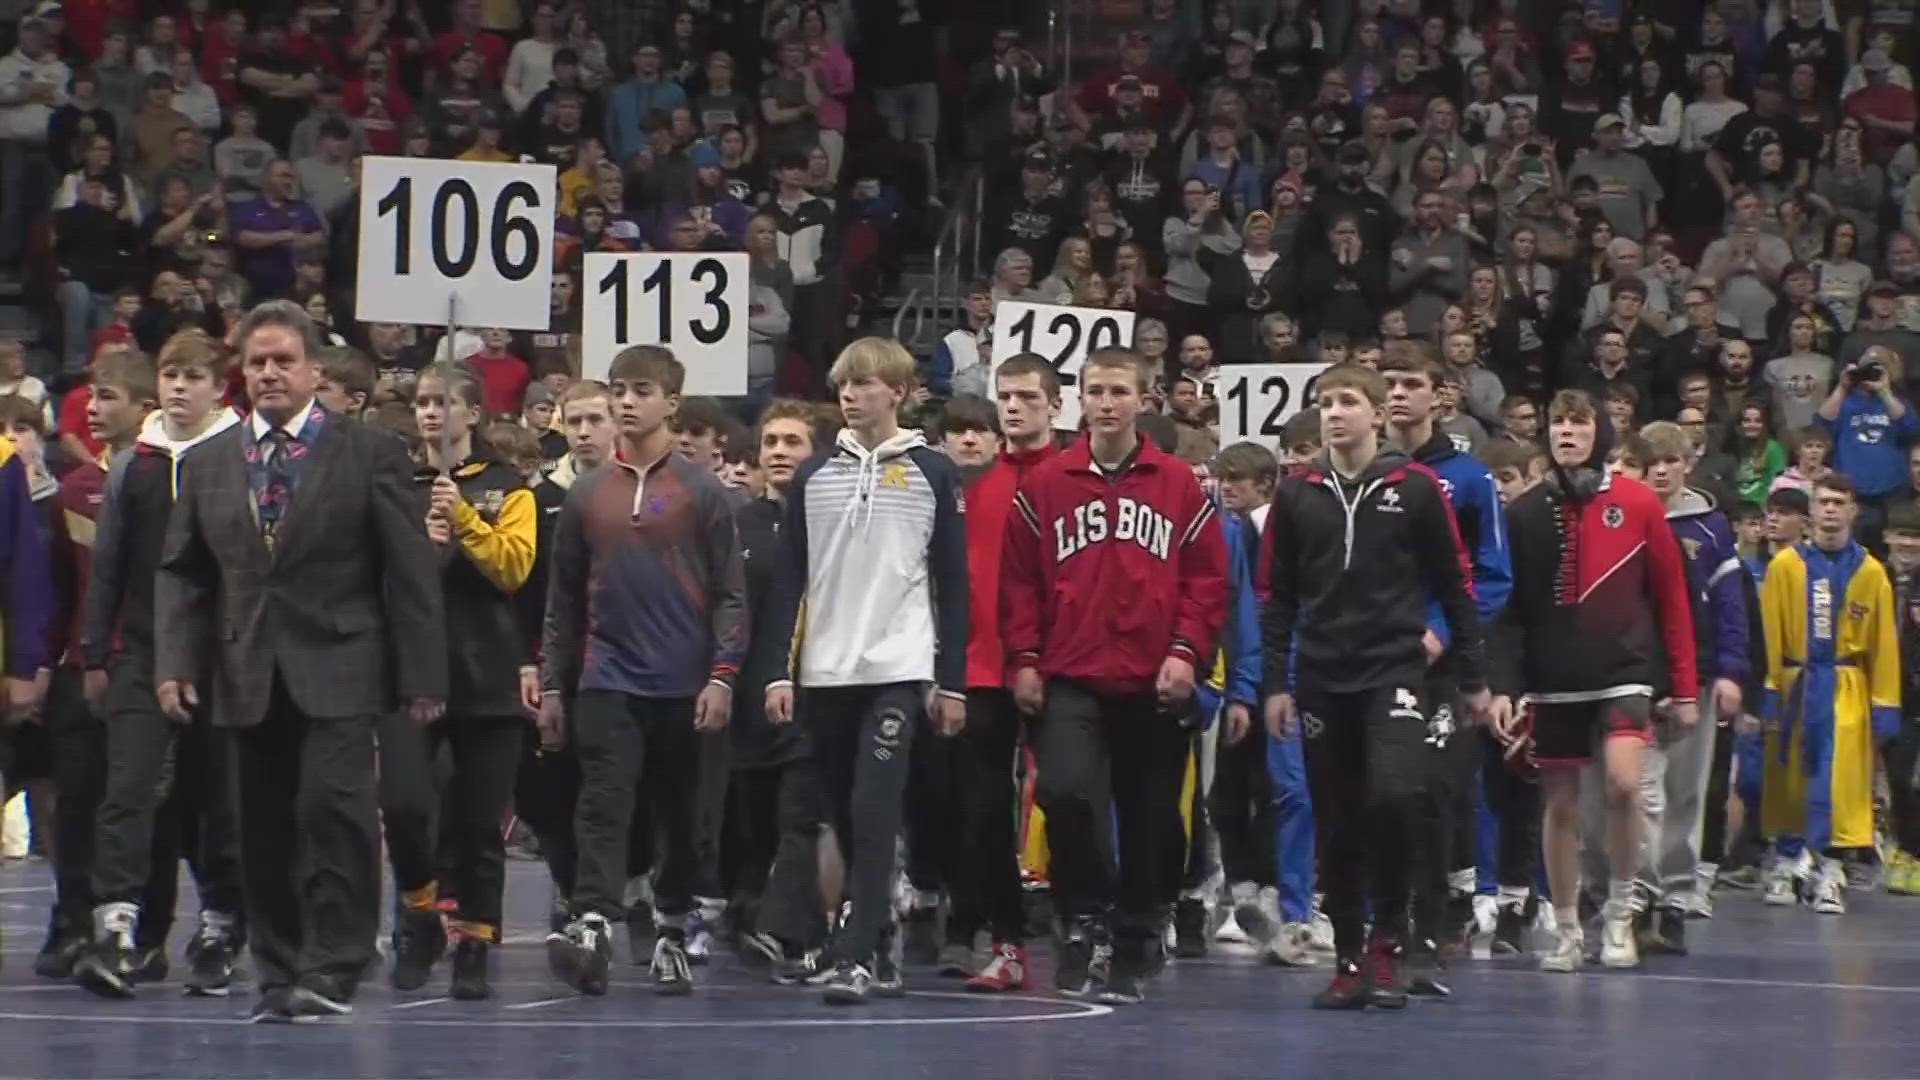 Eight of Saturday's winners are from central Iowa. Local 5 Sports' Jake Brend brings you the winners of tonight's match-ups.